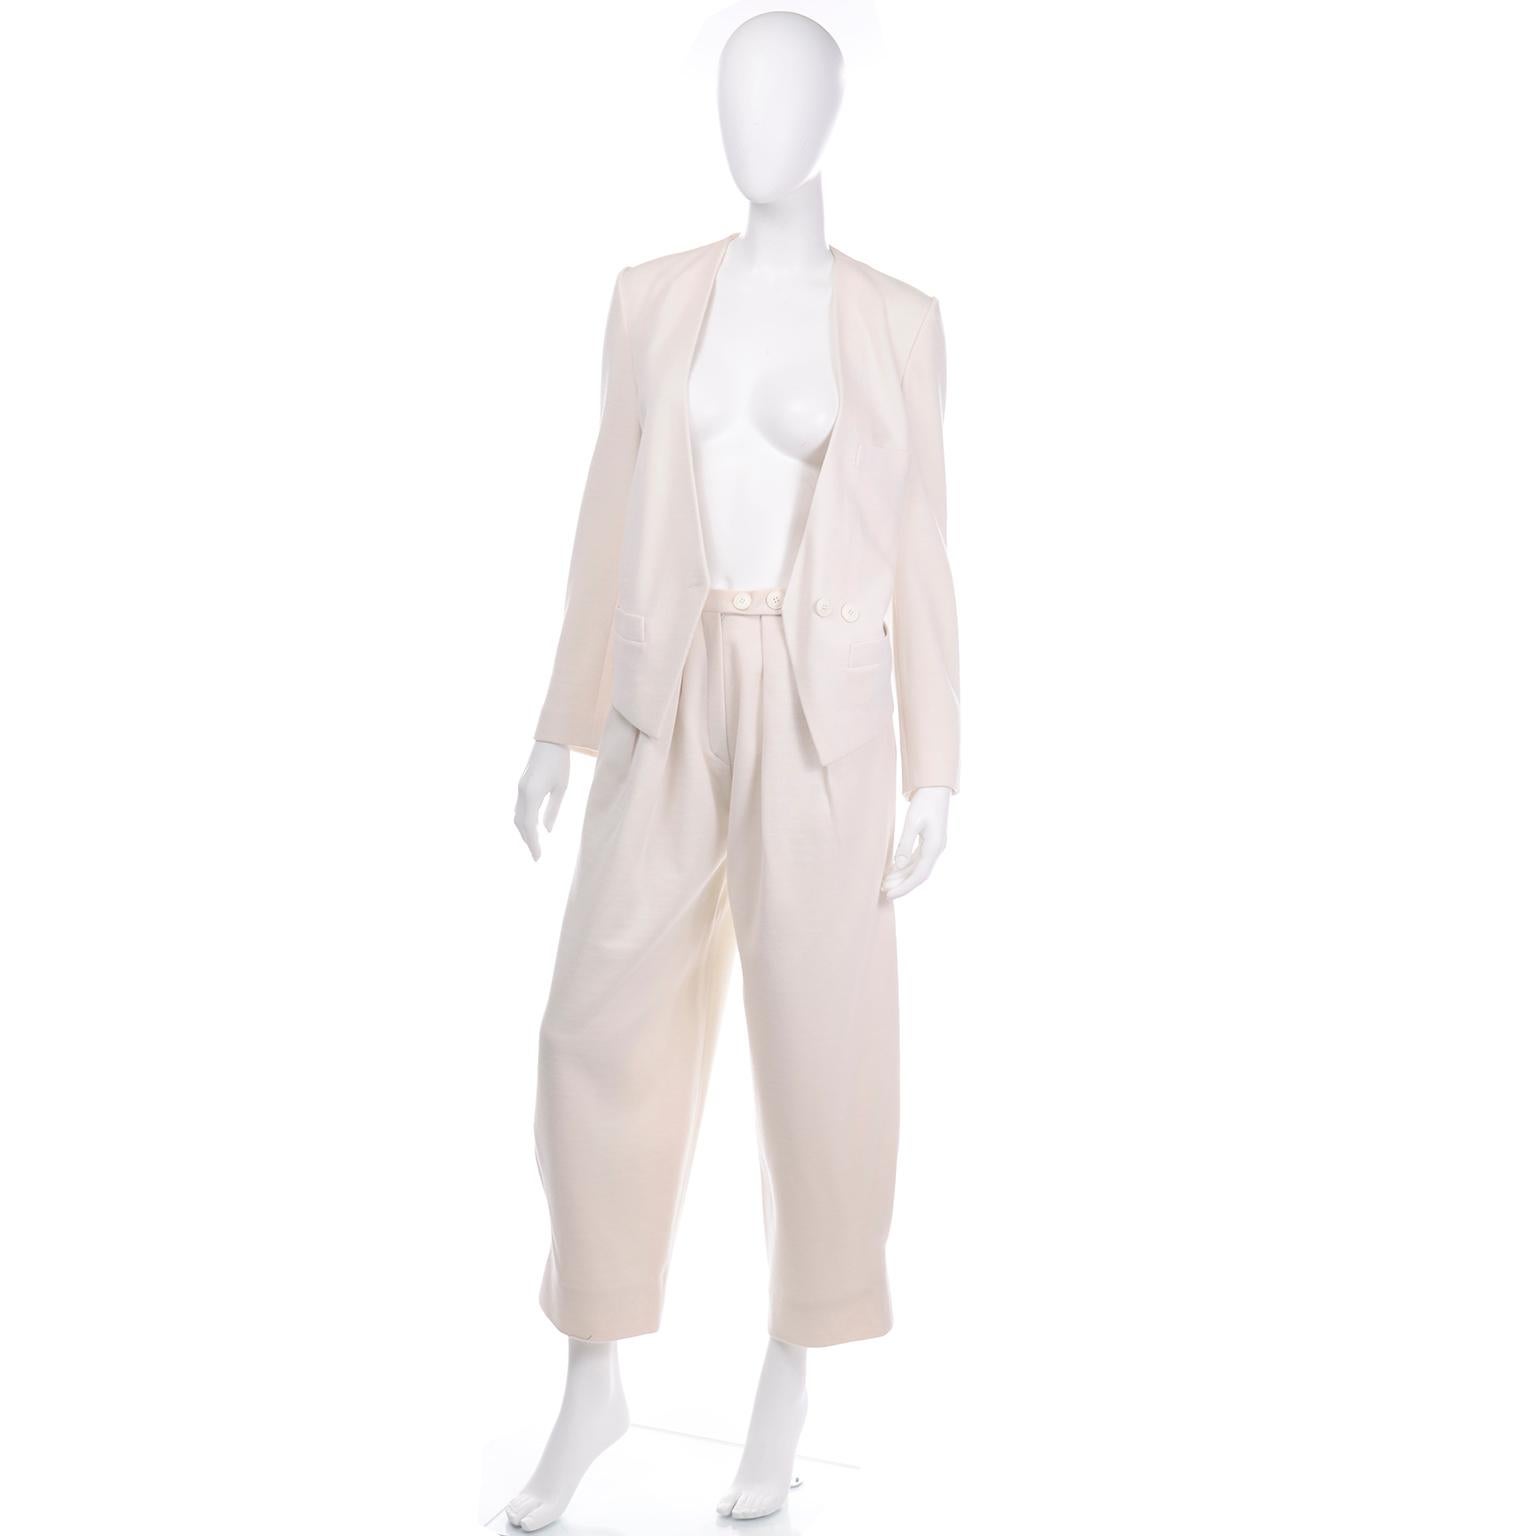 This is an absolutely incredible creamy ivory summer wool balloon pantsuit outfit. The jacket is an abstract blazer style with a double button closure, two side pockets and a small breast pocket. We love the pointed edge hem with a unique cut out in